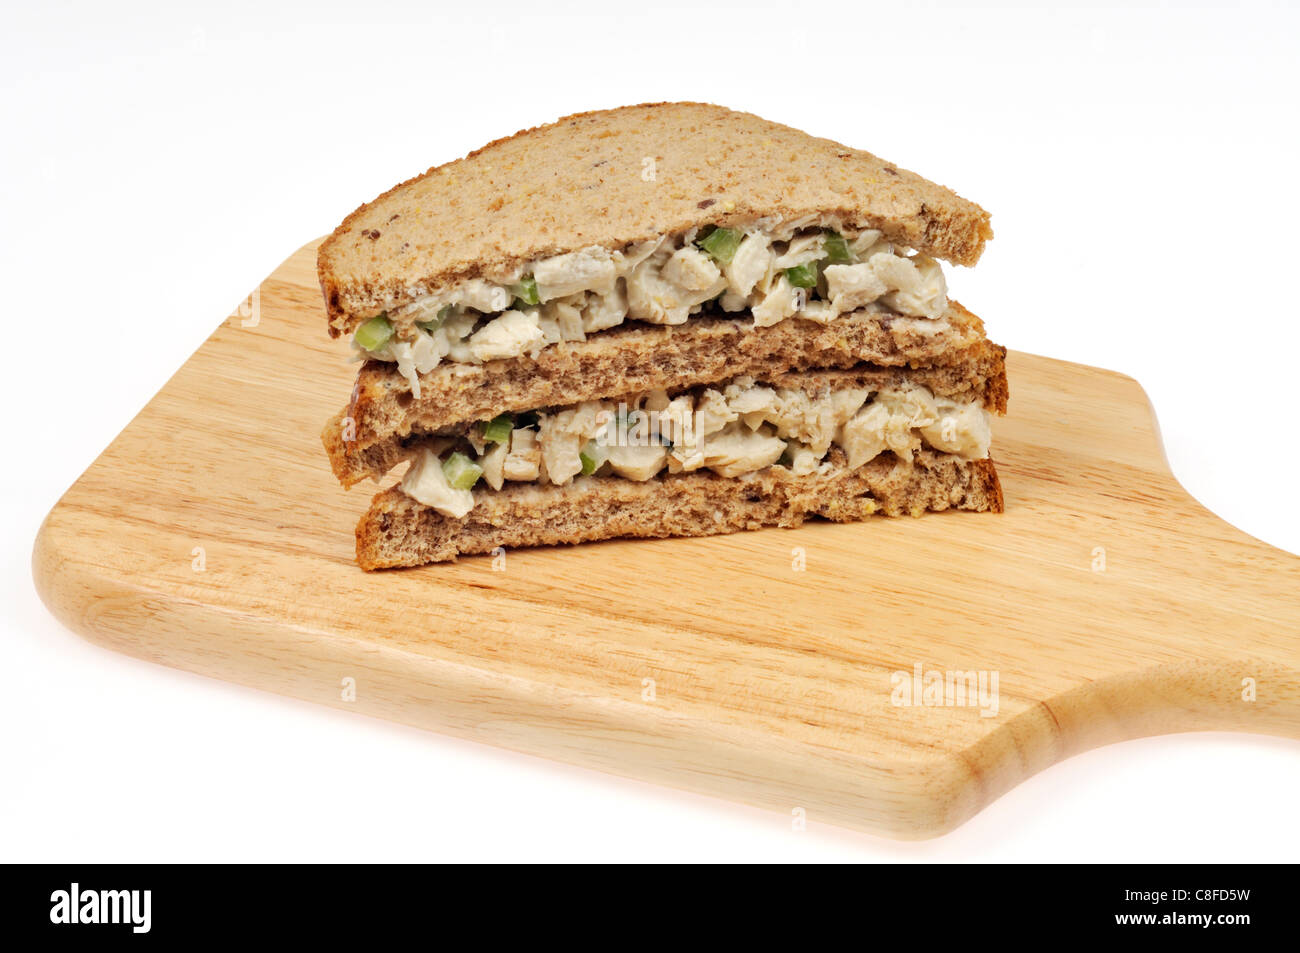 Chicken salad sandwich on wholemeal bread stacked on wood cutting board on white background. Stock Photo